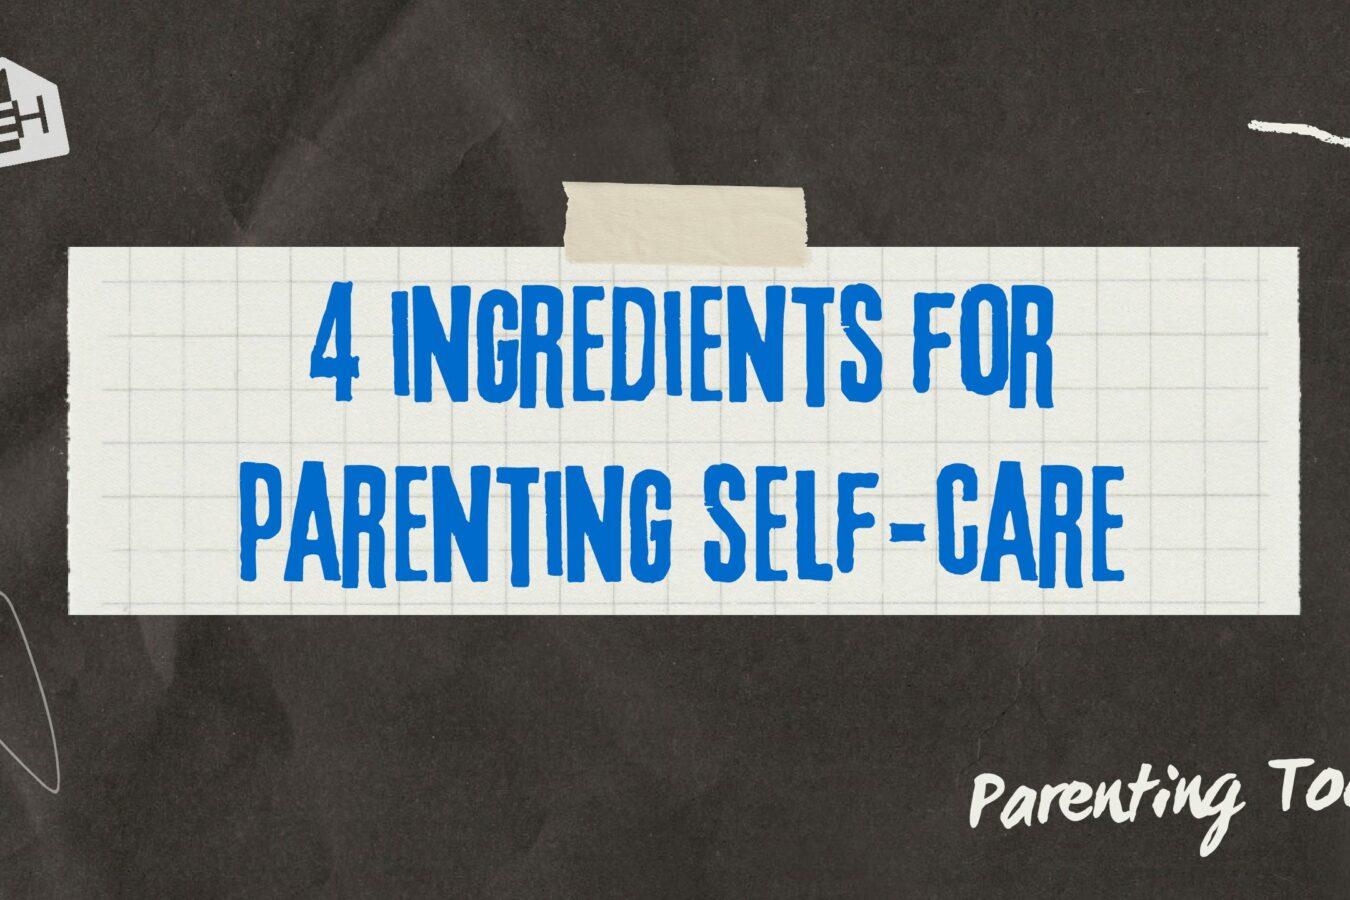 4 Ingredients for Parenting Self-Care